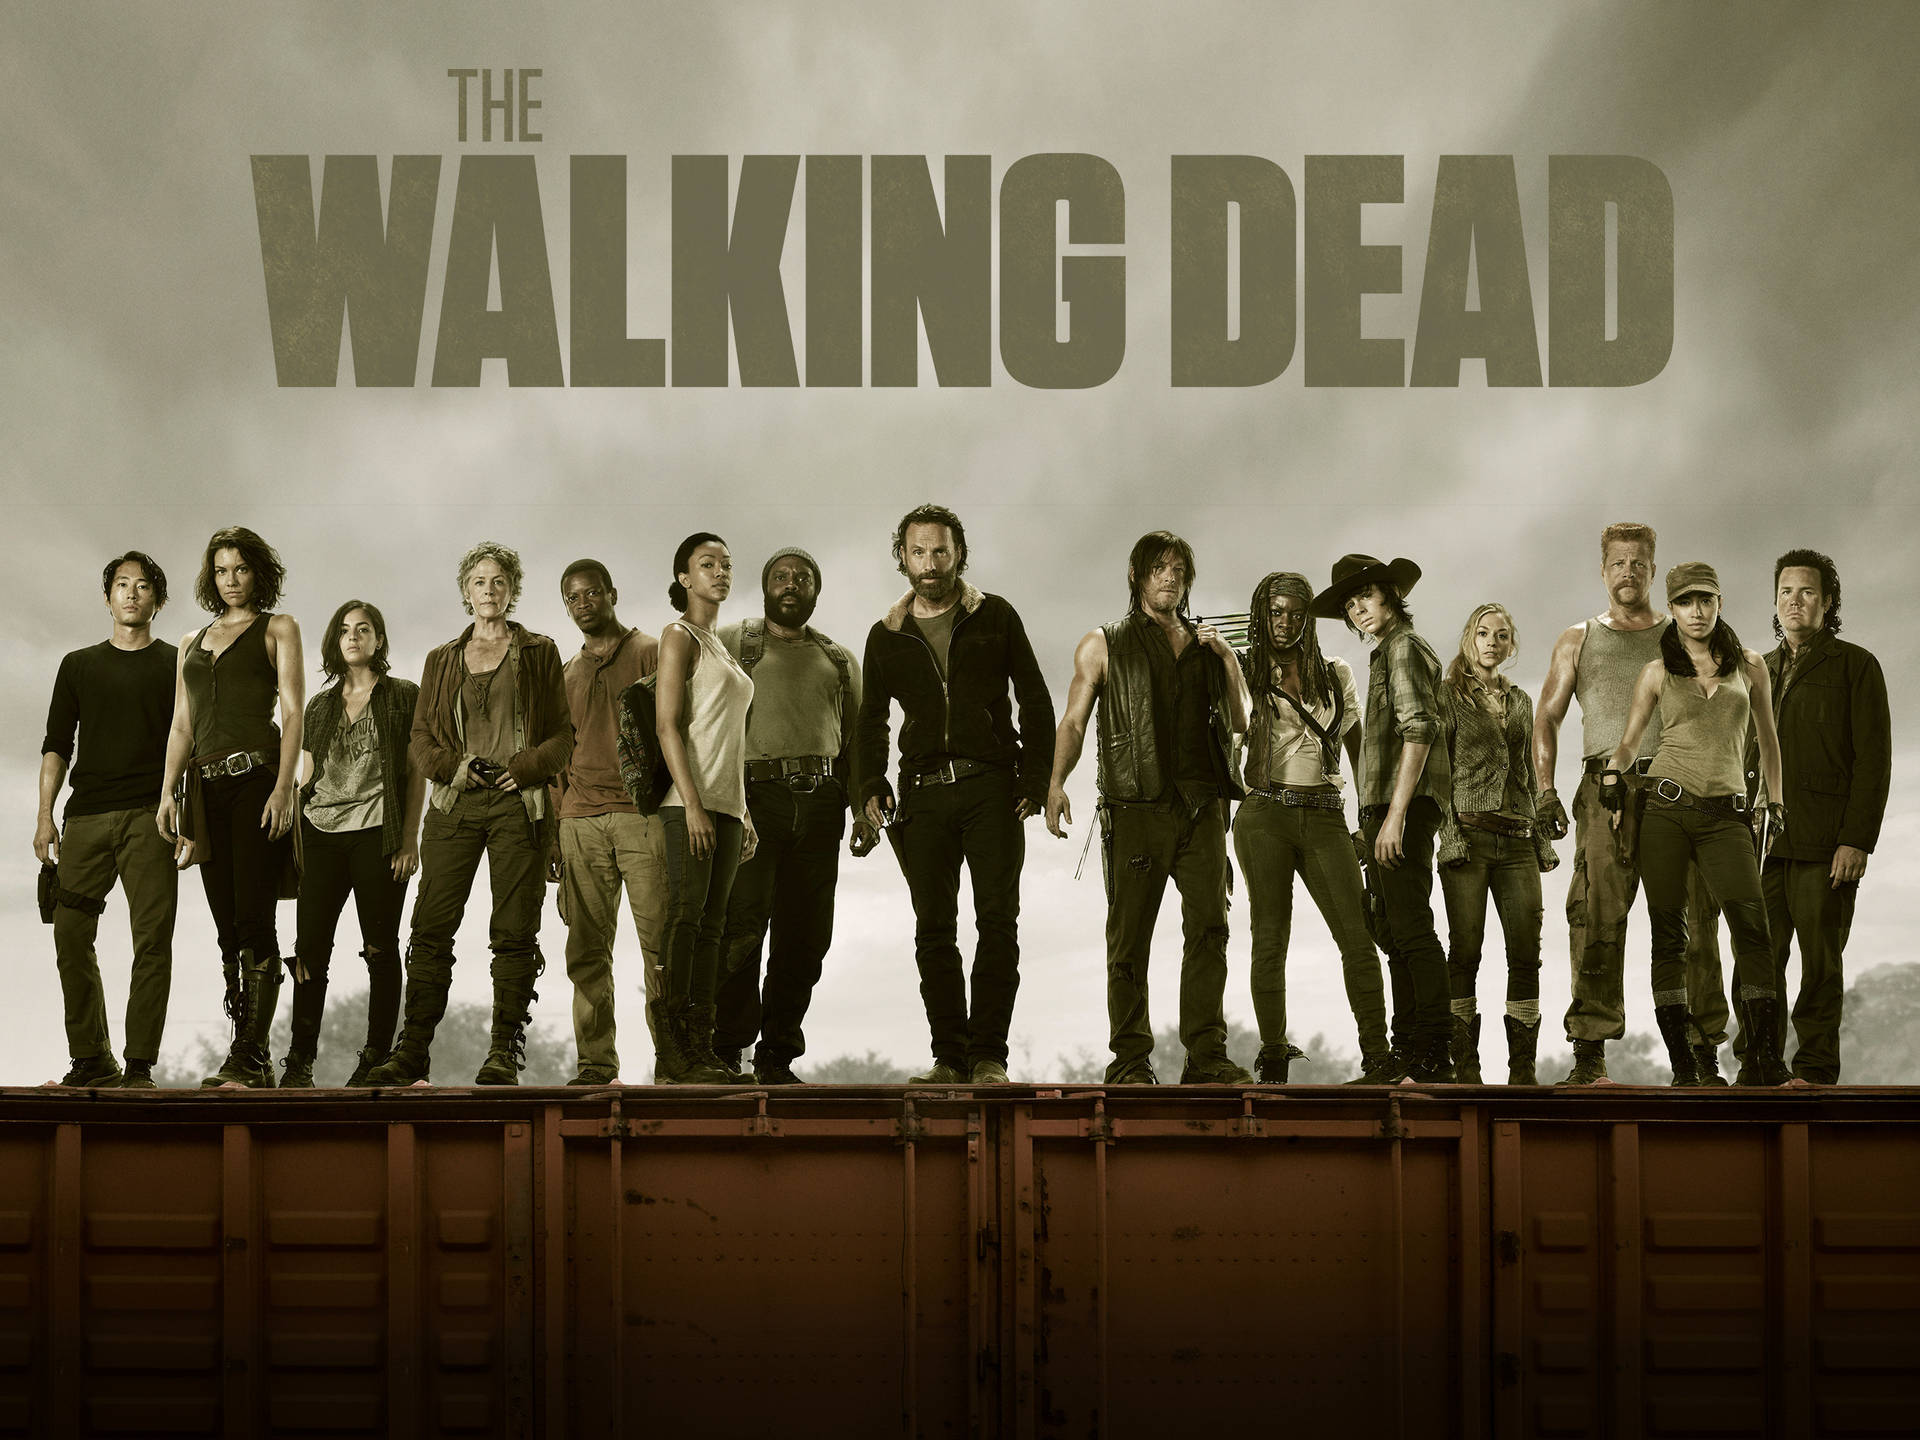 800 The Walking Dead HD Wallpapers and Backgrounds